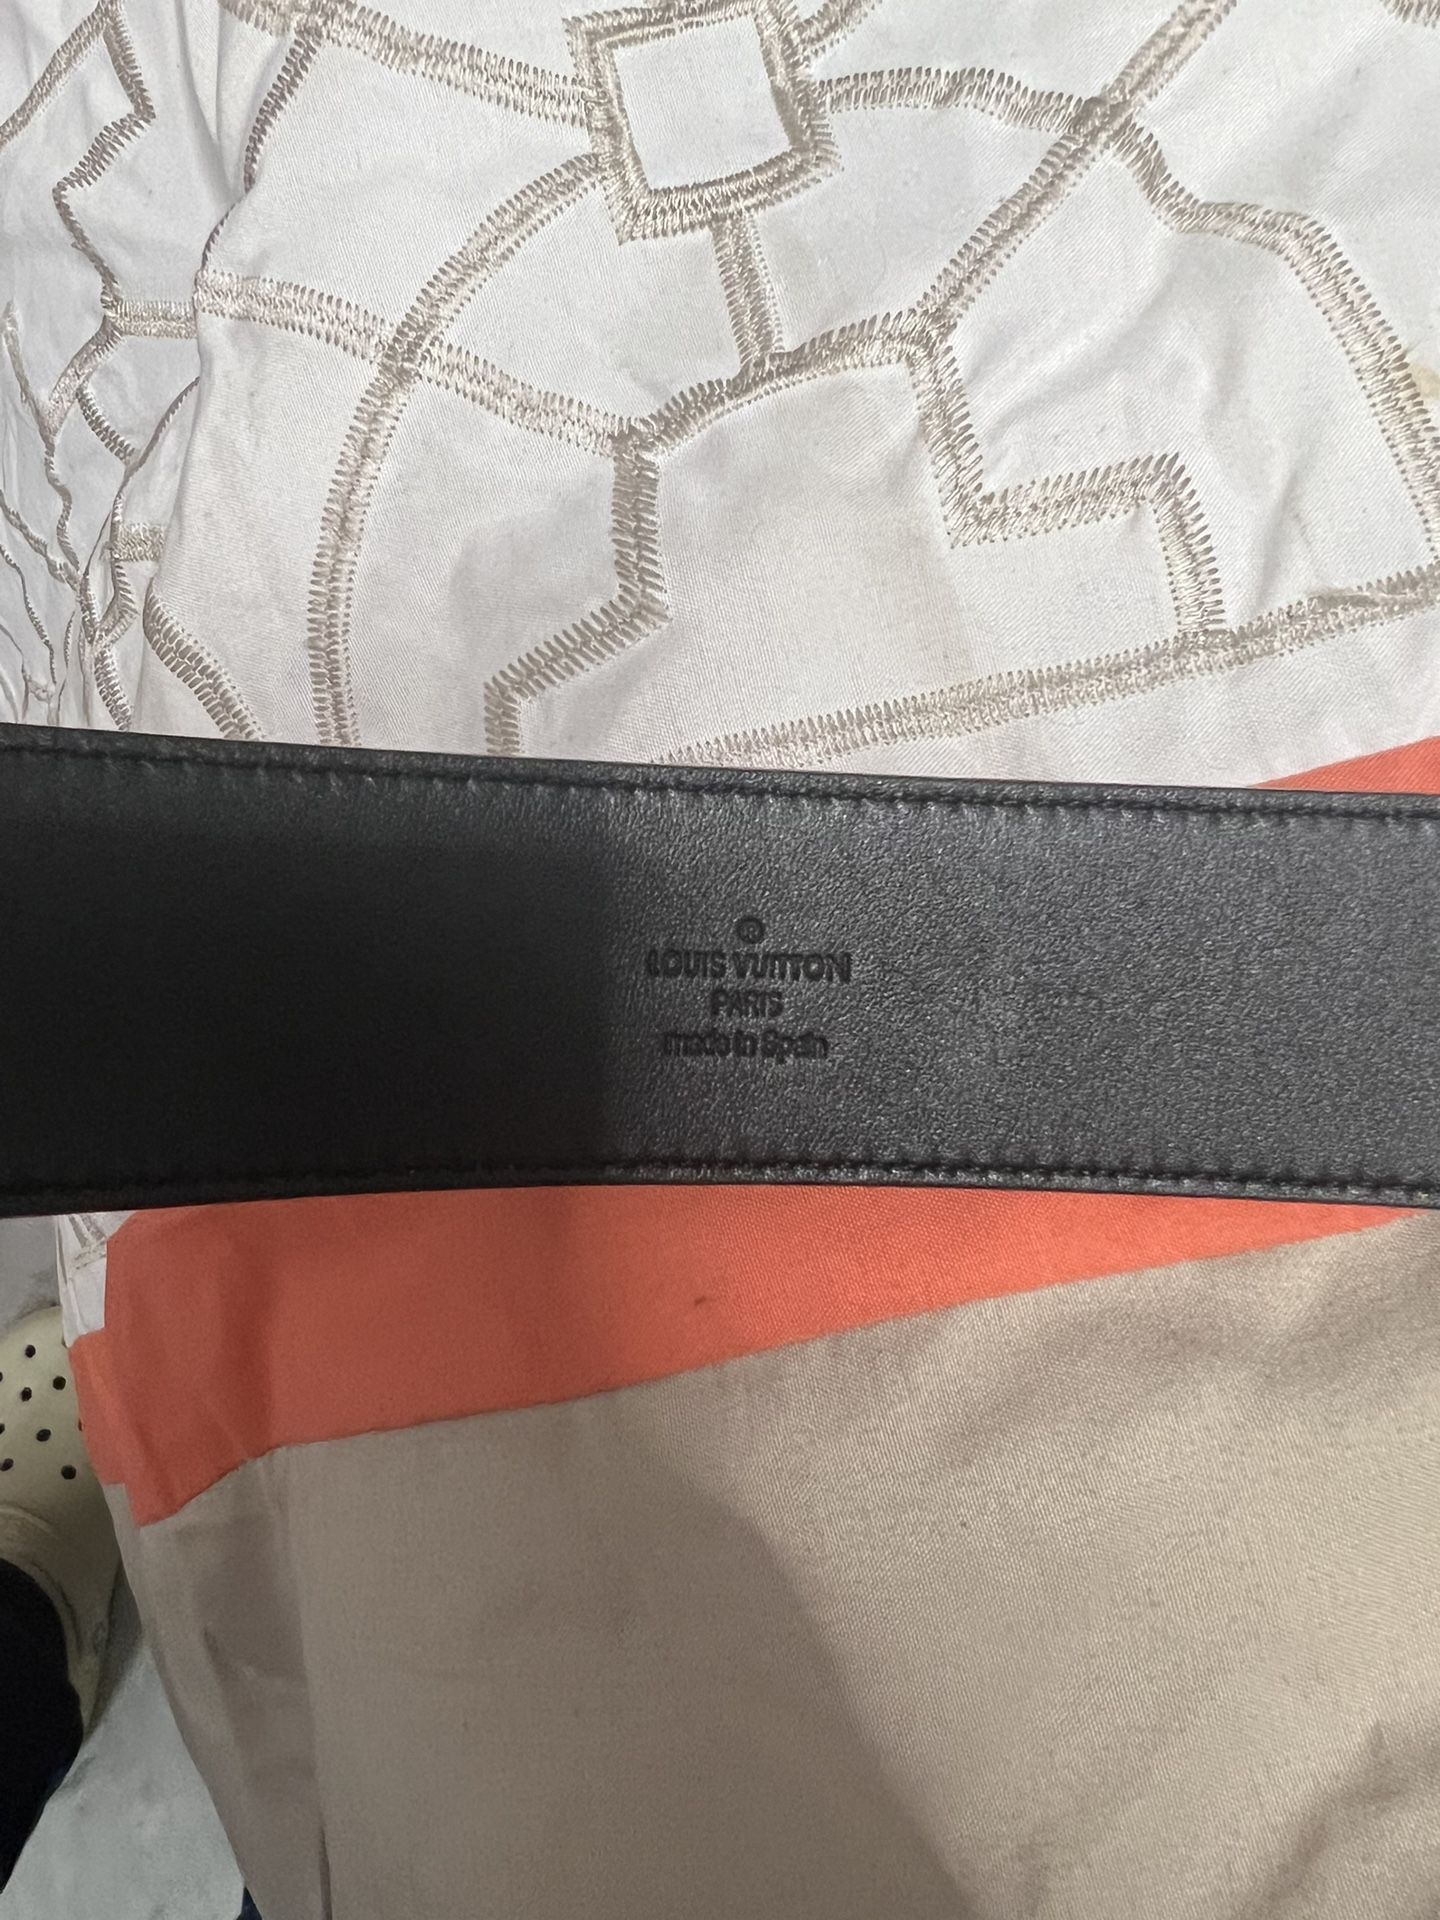 Louis Vuitton 40m Belt for Sale in Milford, CT - OfferUp